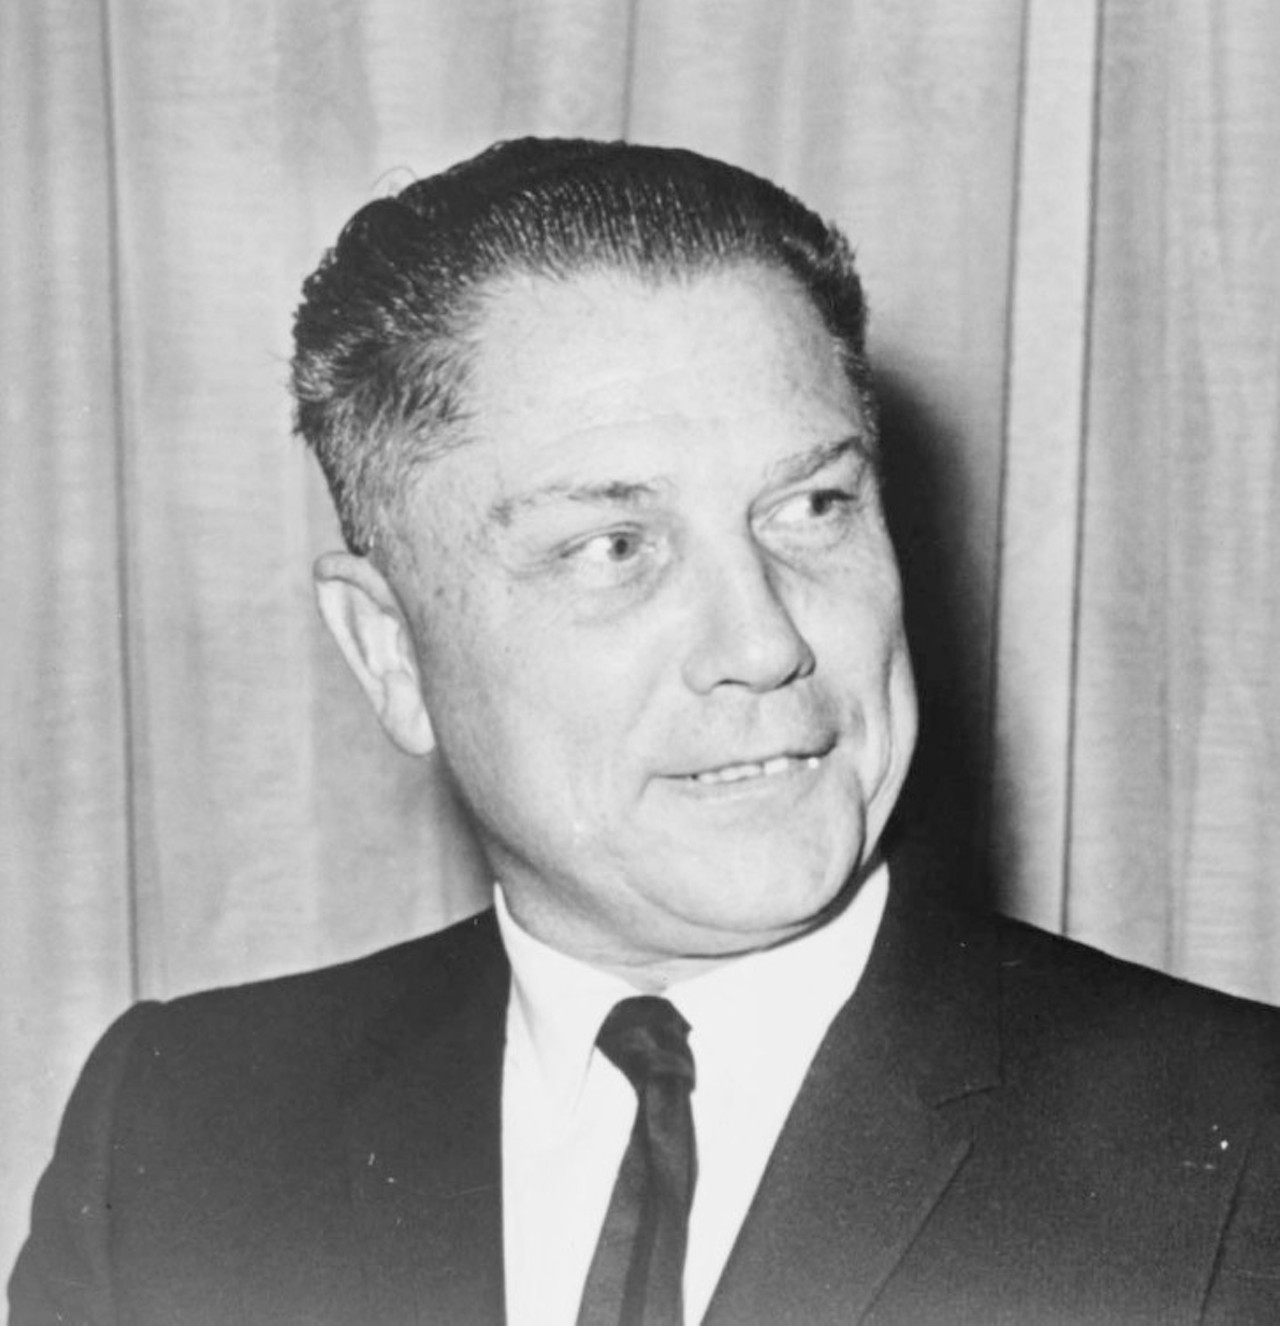 What happened to Jimmy Hoffa?
&#147;My uncle Kenny said he&#146;s buried under his driveway.&#148; 
Photo via Garam/Wikimedia Commons